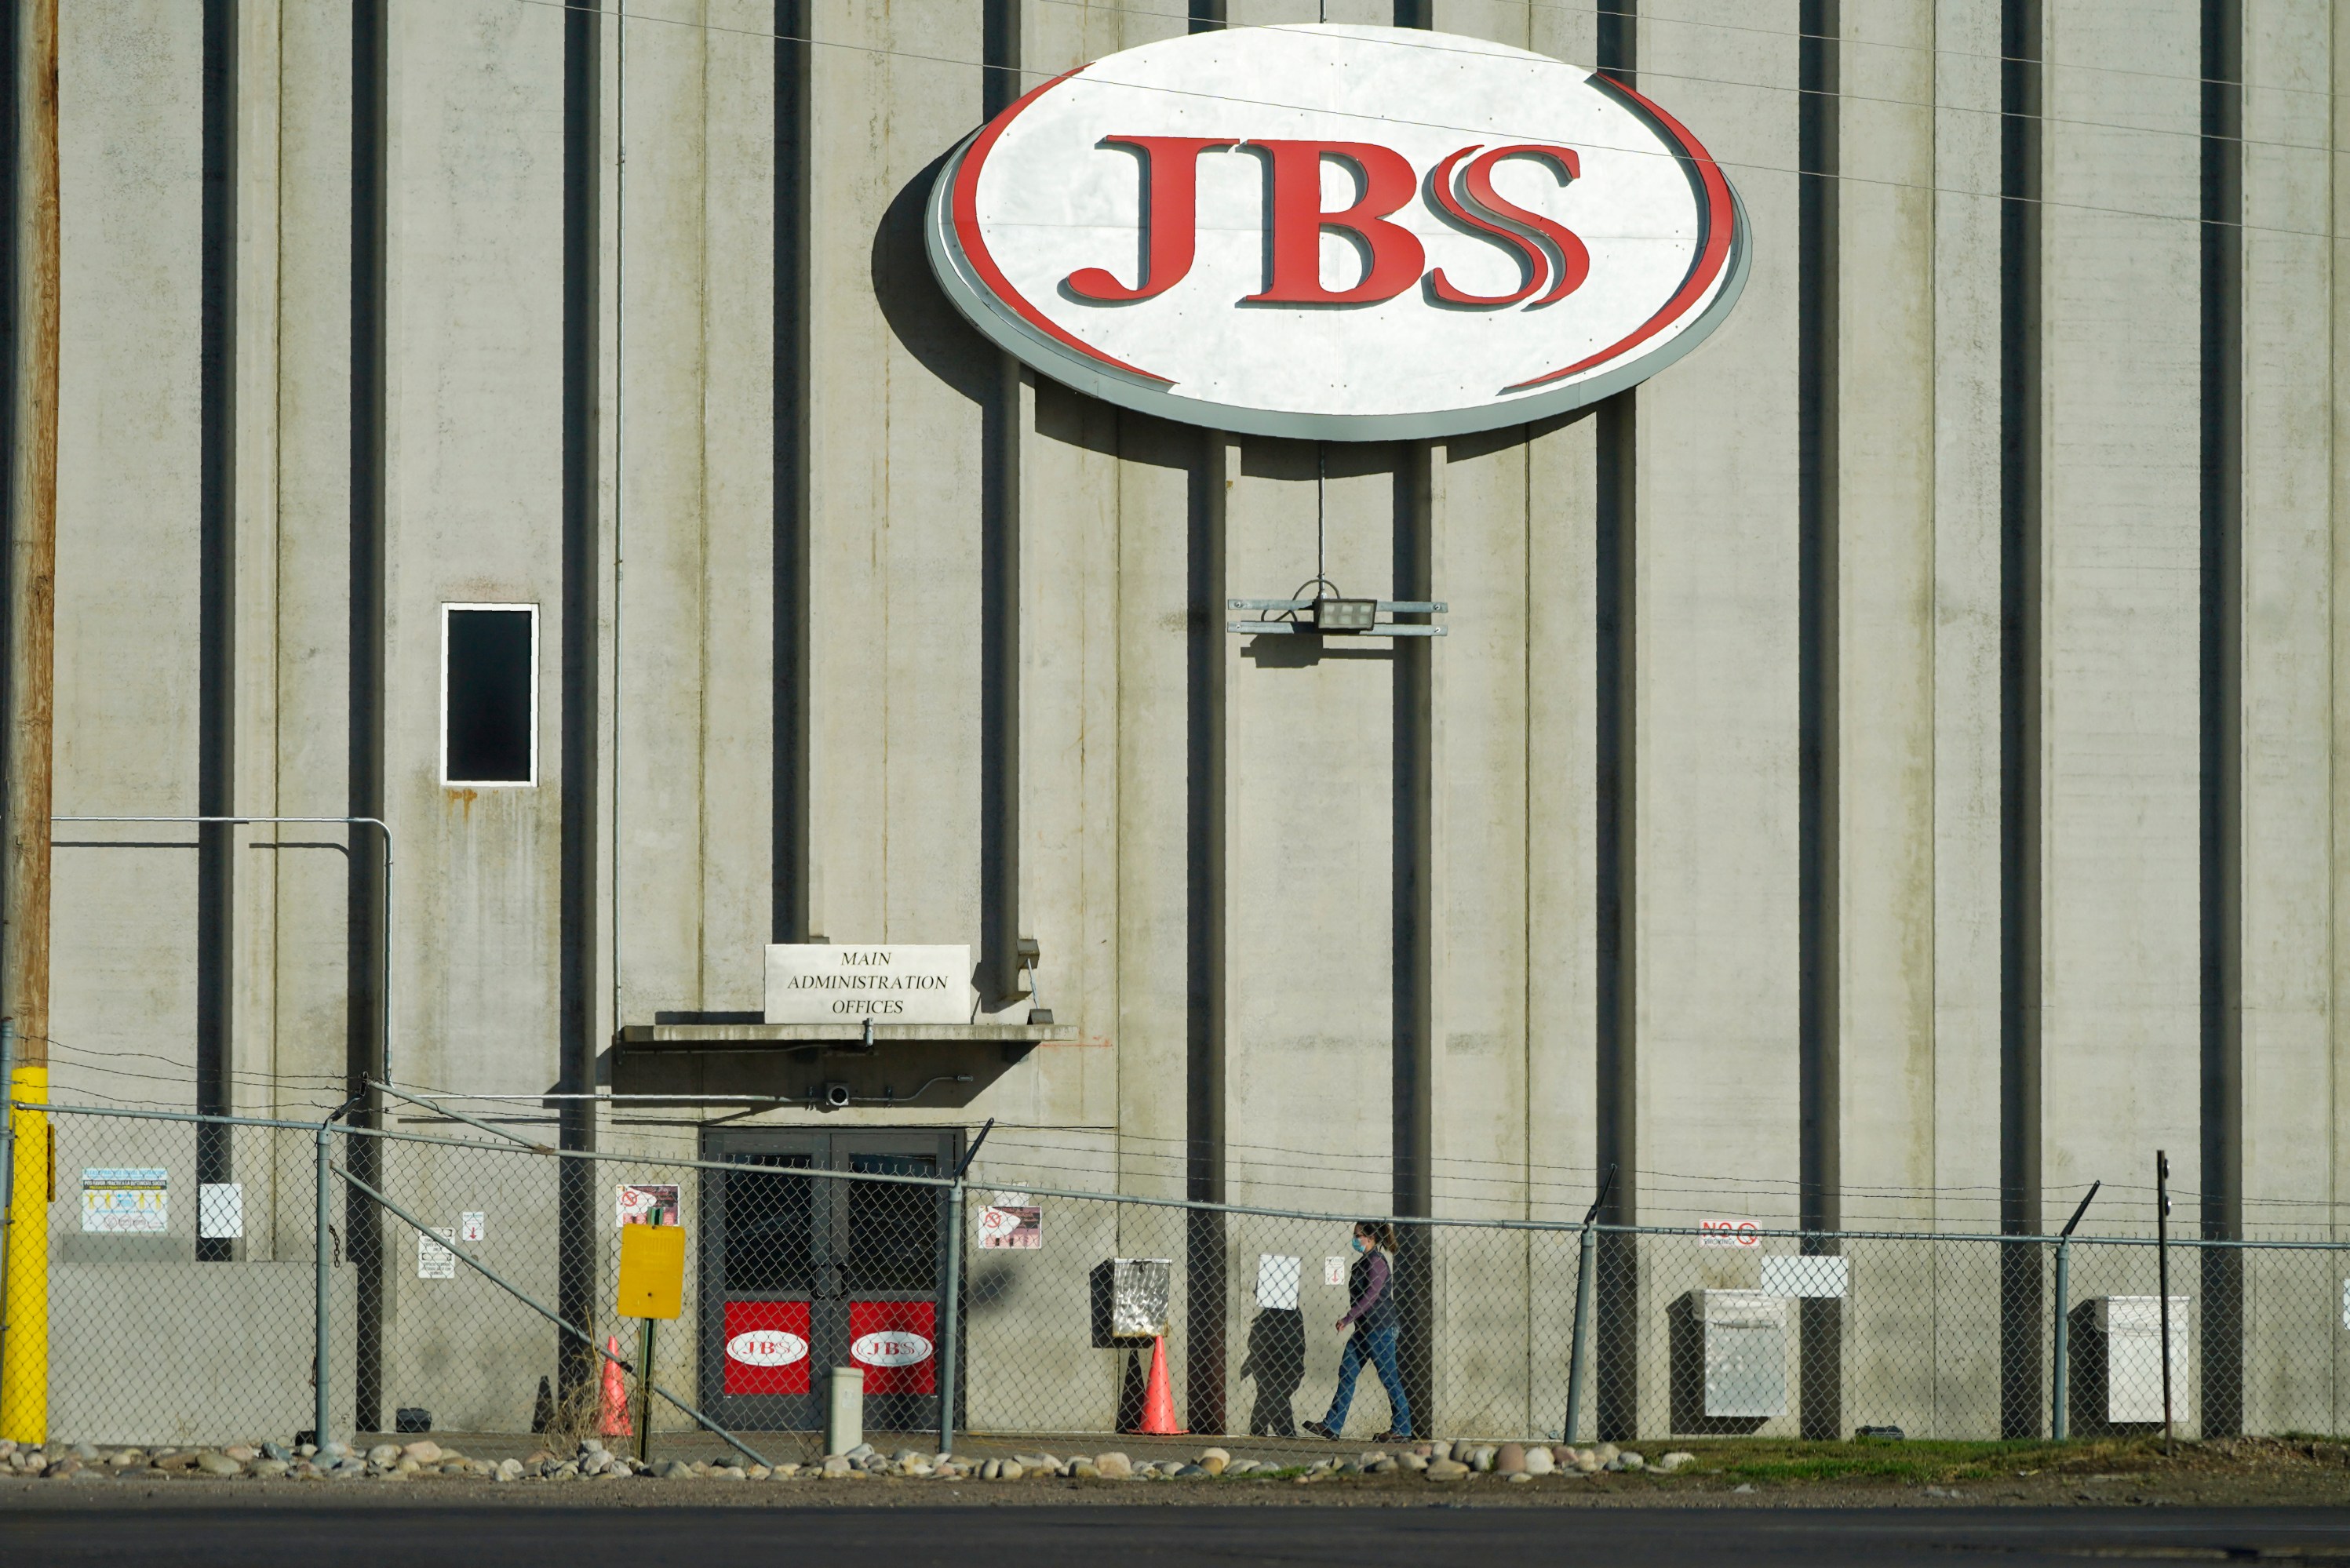 In this Oct. 12, 2020 file photo, a worker heads into the JBS meatpacking plant in Greeley, Colo. A weekend ransomware attack on the world’s largest meat company is disrupting production around the world just weeks after a similar incident shut down a U.S. oil pipeline.